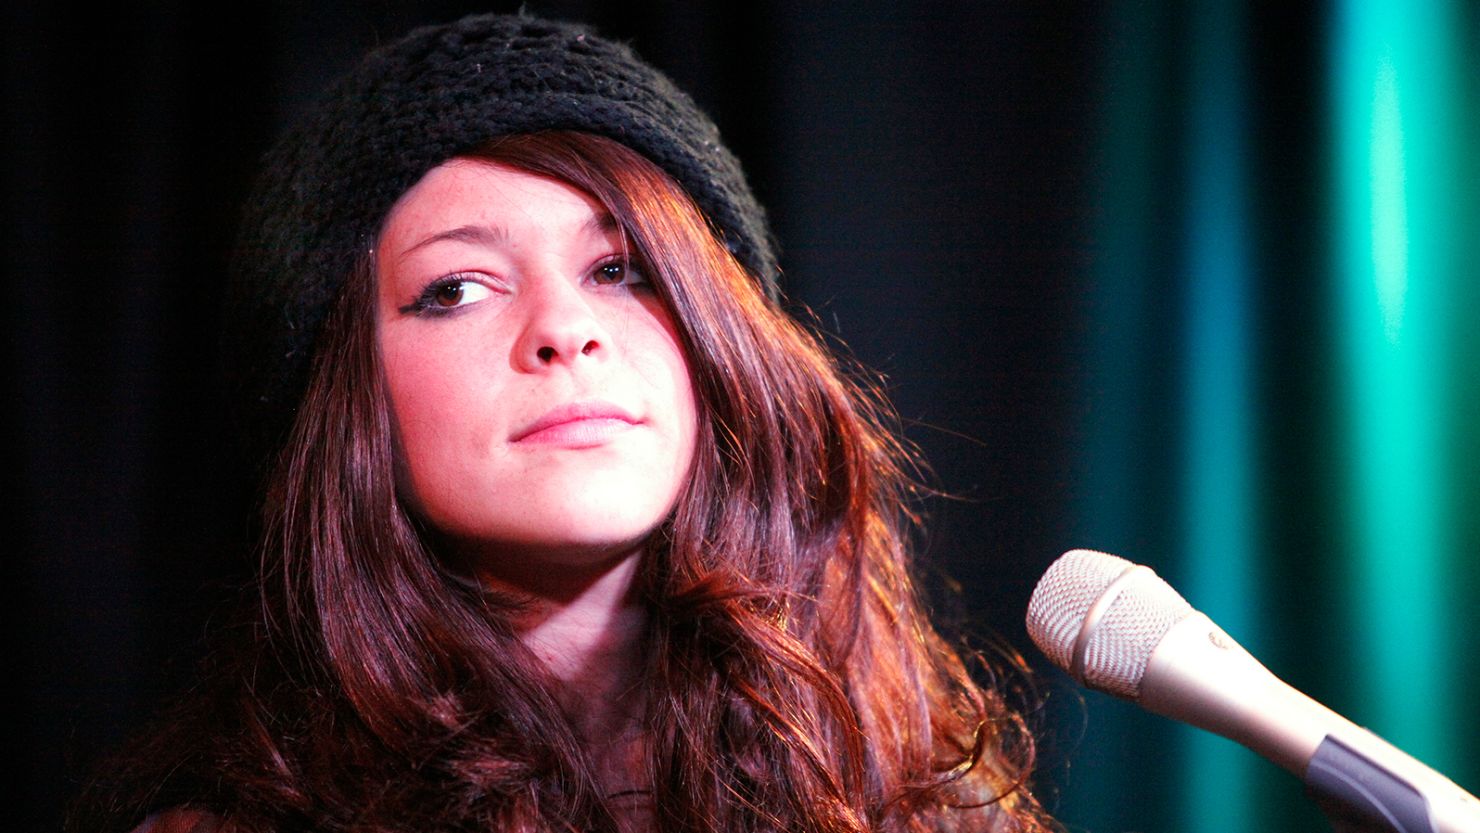 Fellow musicians have been paying tribute to Cady Groves.